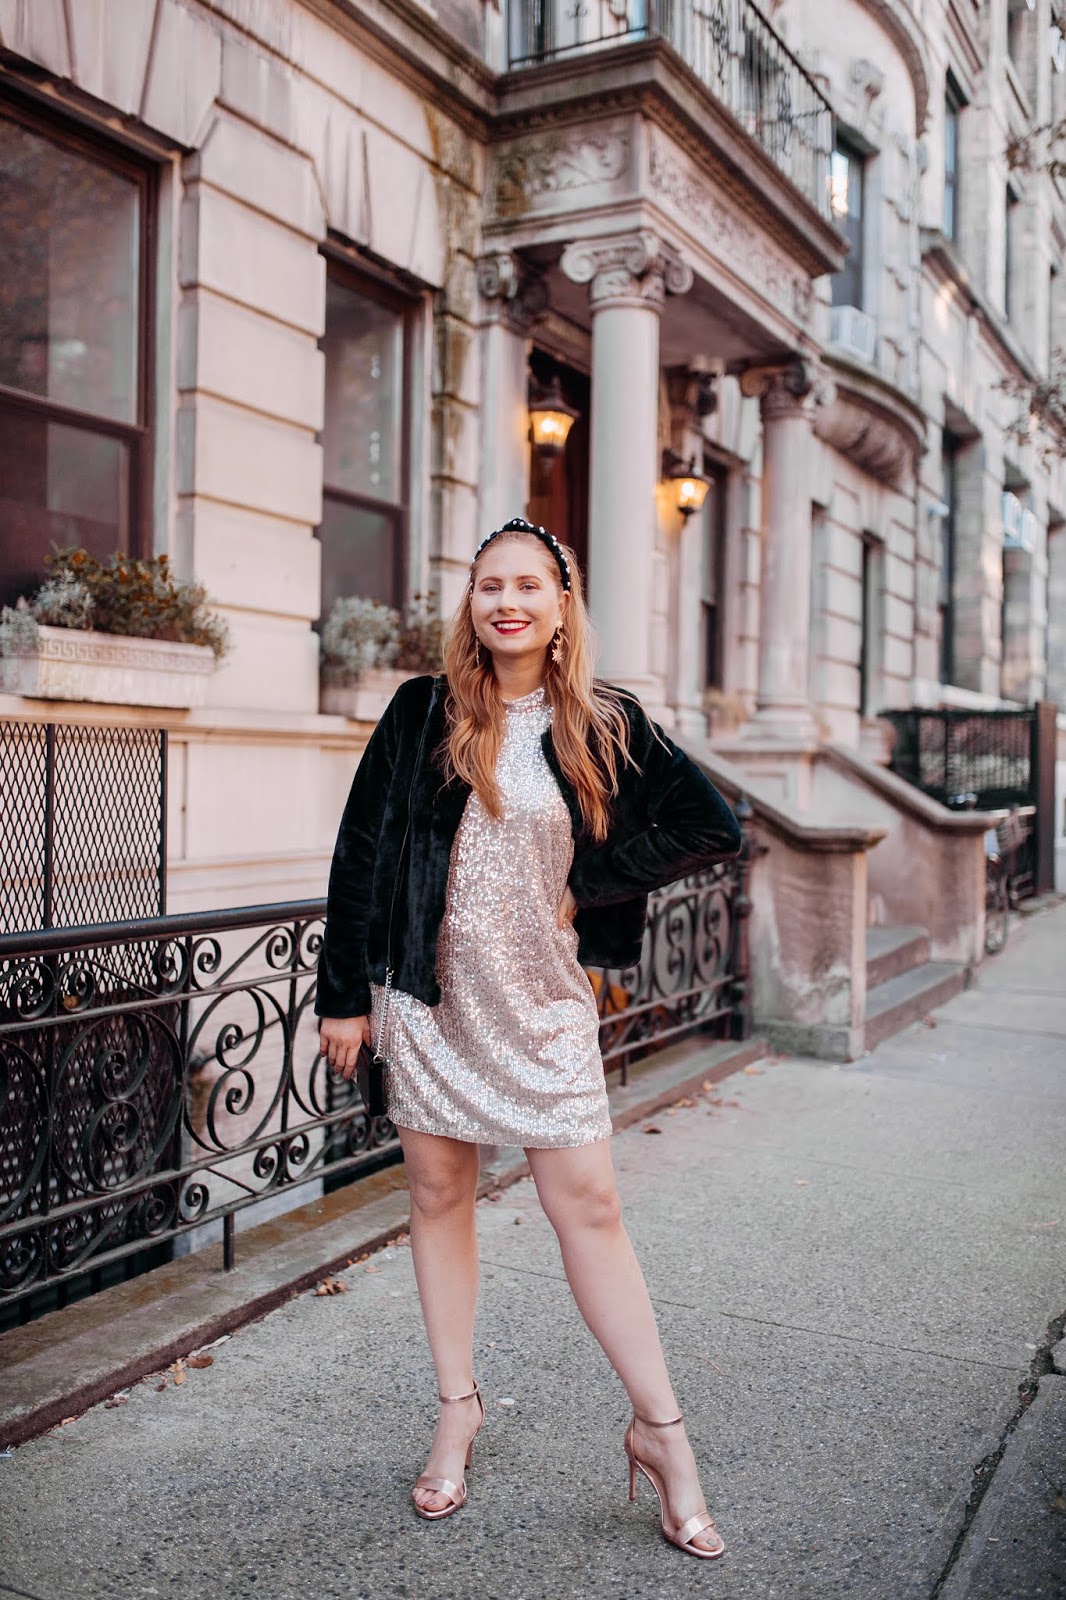 How to Style Sequins for New Year's Eve.1. Sequin Dress + Faux Fur Jackets.2. Sequin Skirt + Cropped Chenille Eyelash Sweaters. H&M Sweaters. Forever 21 Chenille Sweaters. Sequin Pants from Express. Sequin Skirts from Express. New York City Photoshoot with Carter Fish.